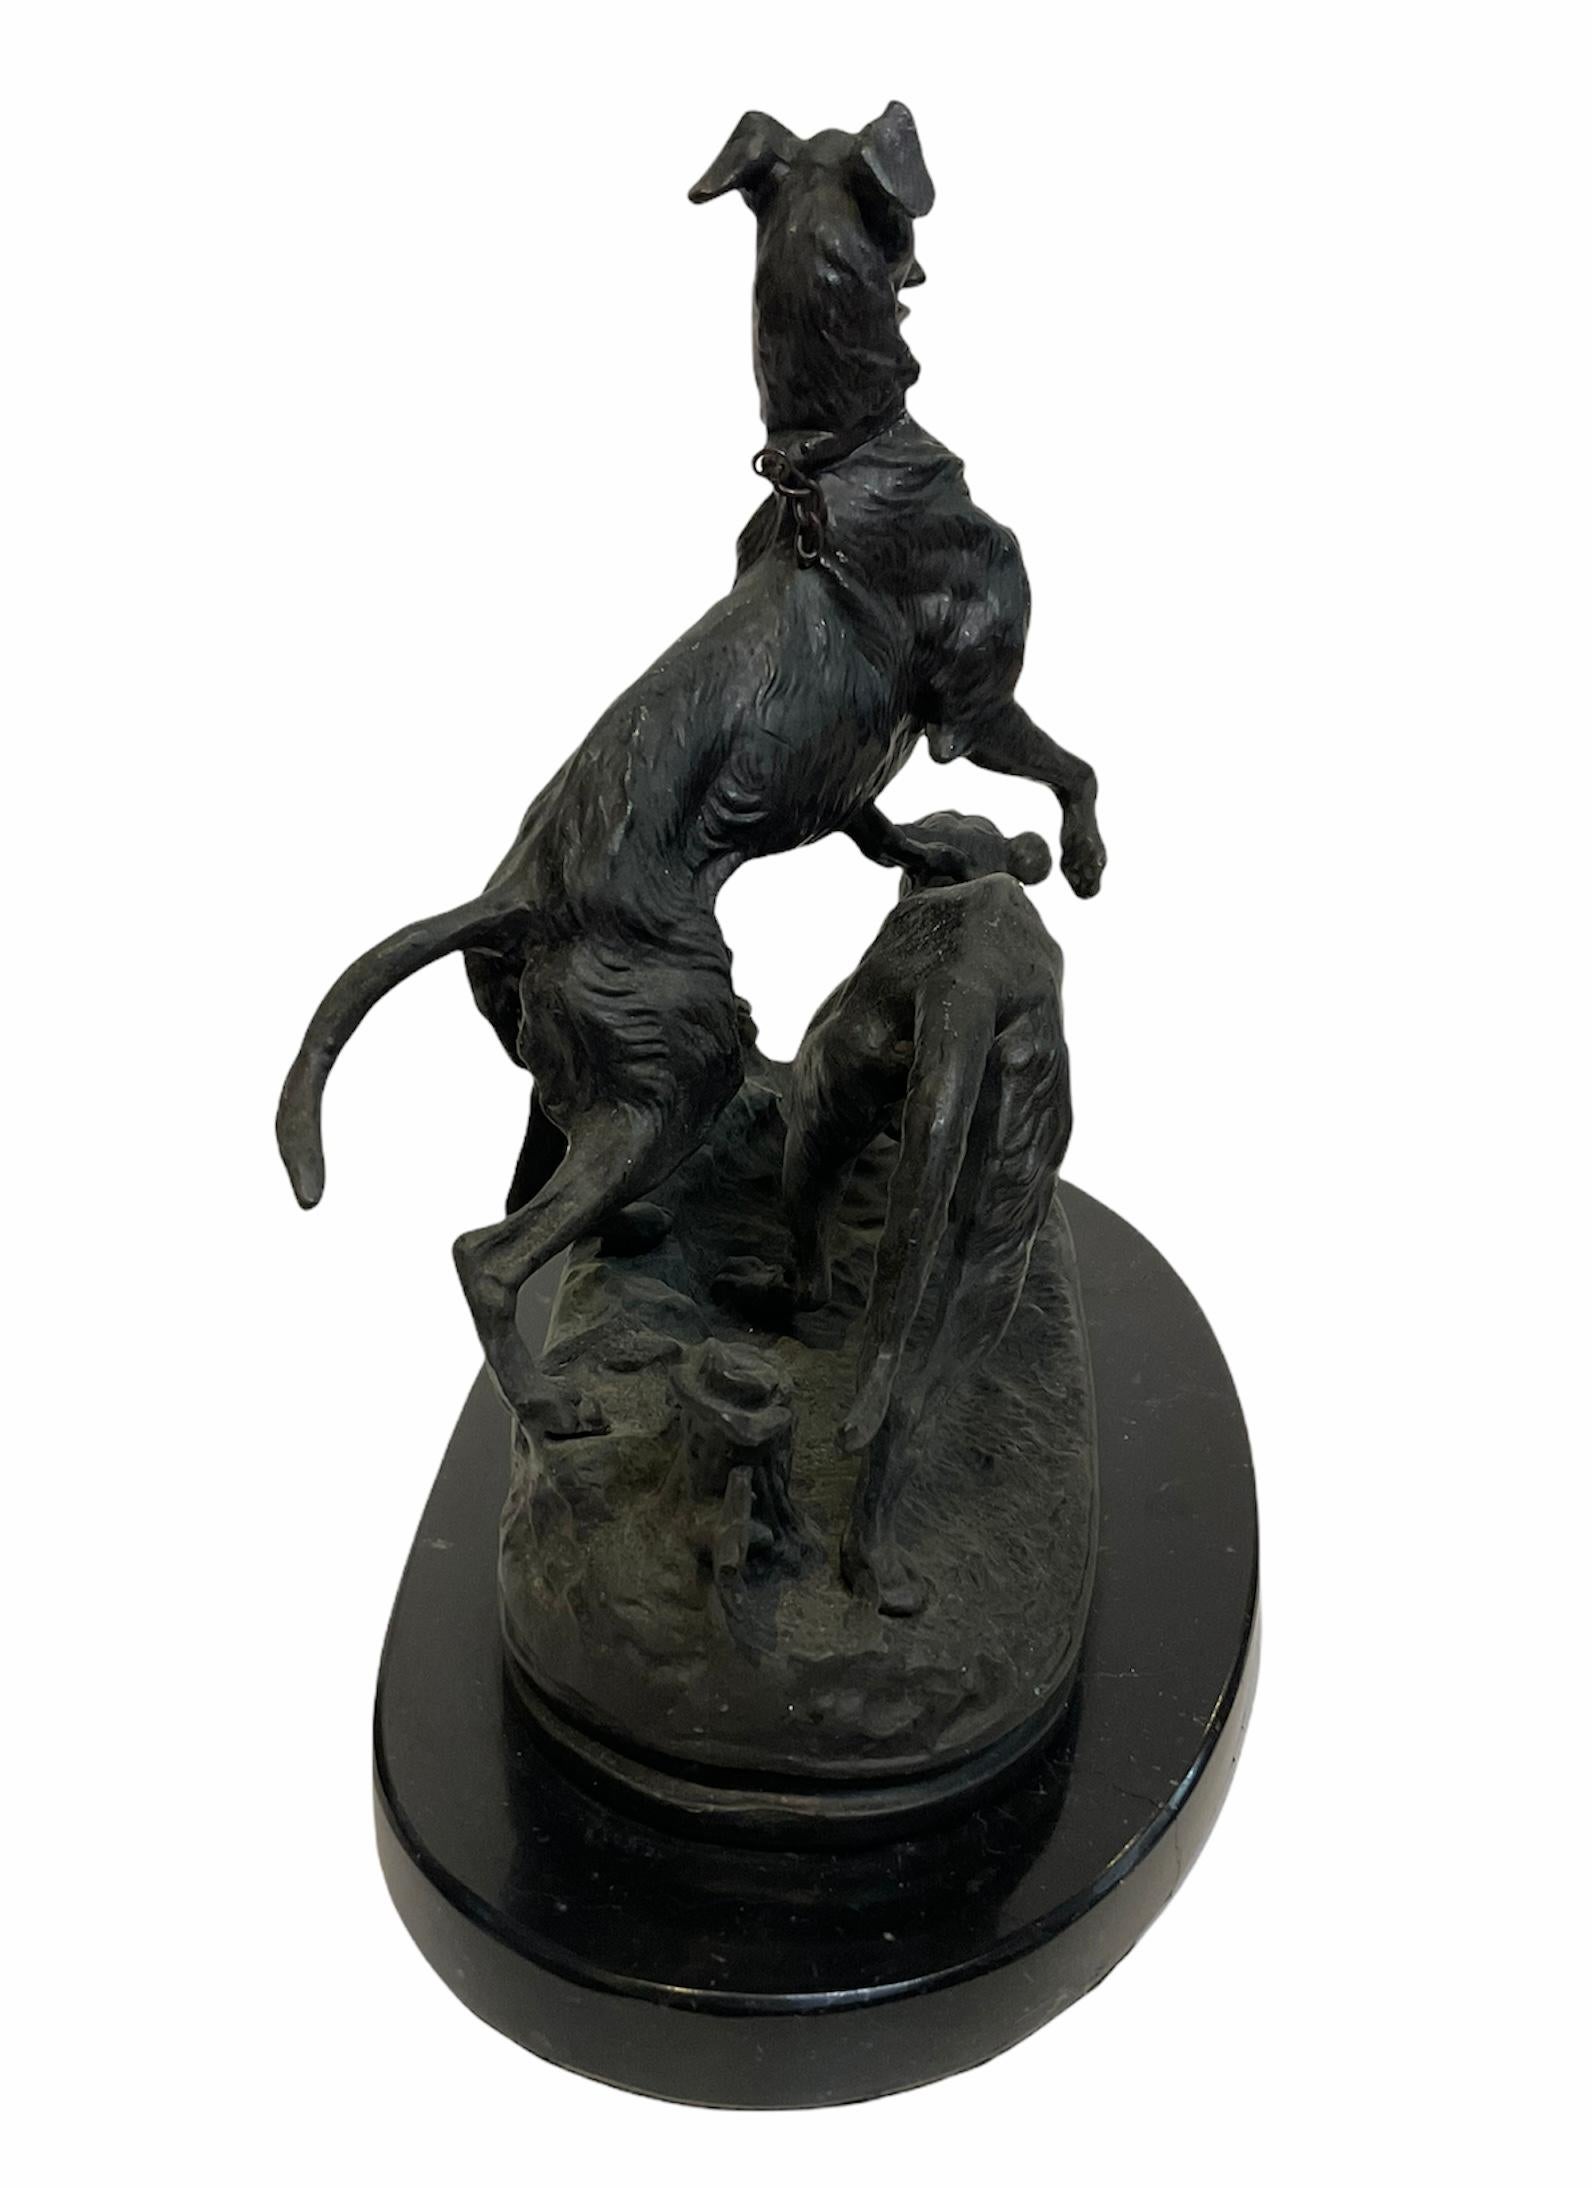 This is a P.J.Mene patinated bronze sculptures of a pair of hunting dogs. He is considered one of the pioneers of animals sculpture of the 19th century. The sculptures feature a hairy whippet dog standing with its frontal paws over an English Setter